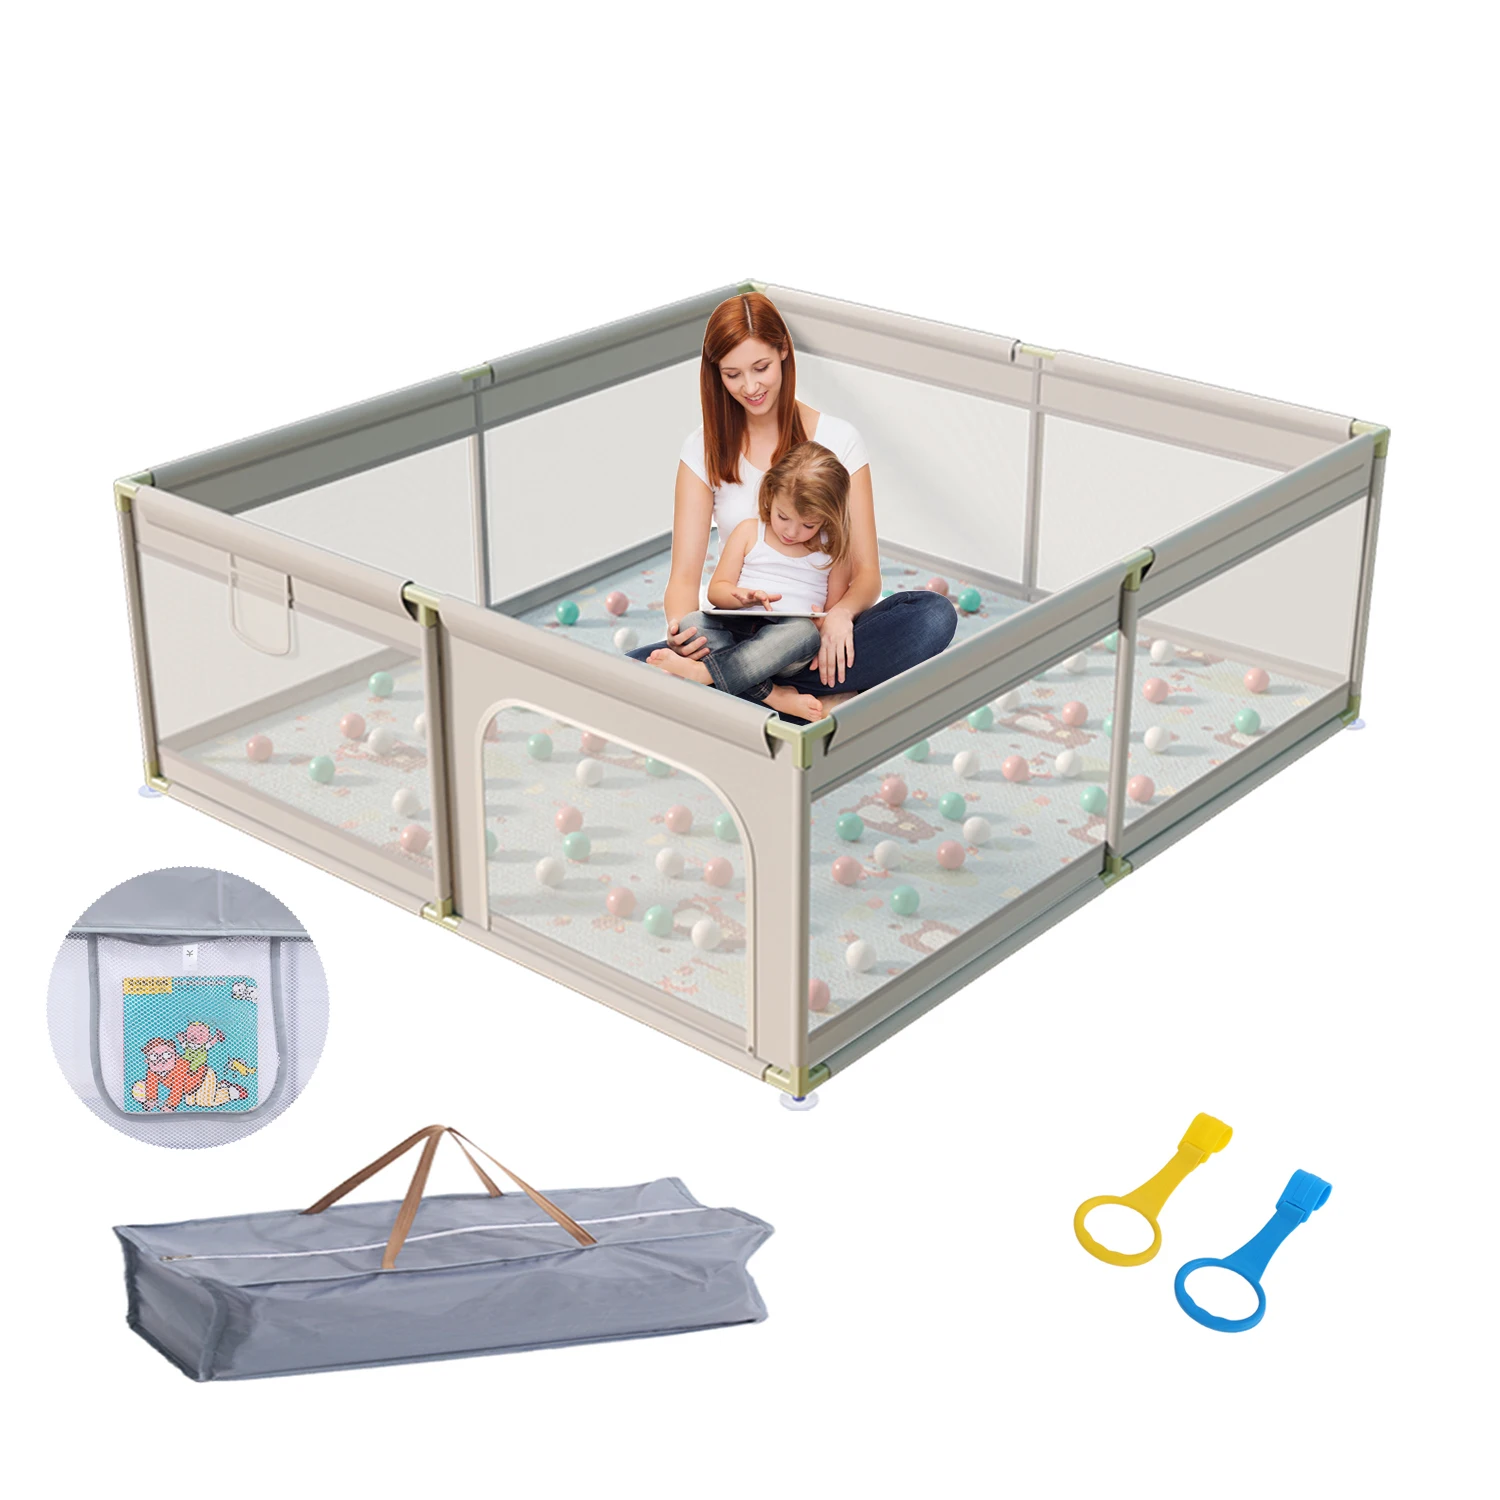 

Extra Large Baby Playpen Safety Playard,360 Degree Visible Kids Activity Center Fence for Toddlers Children Kid Baby Playground